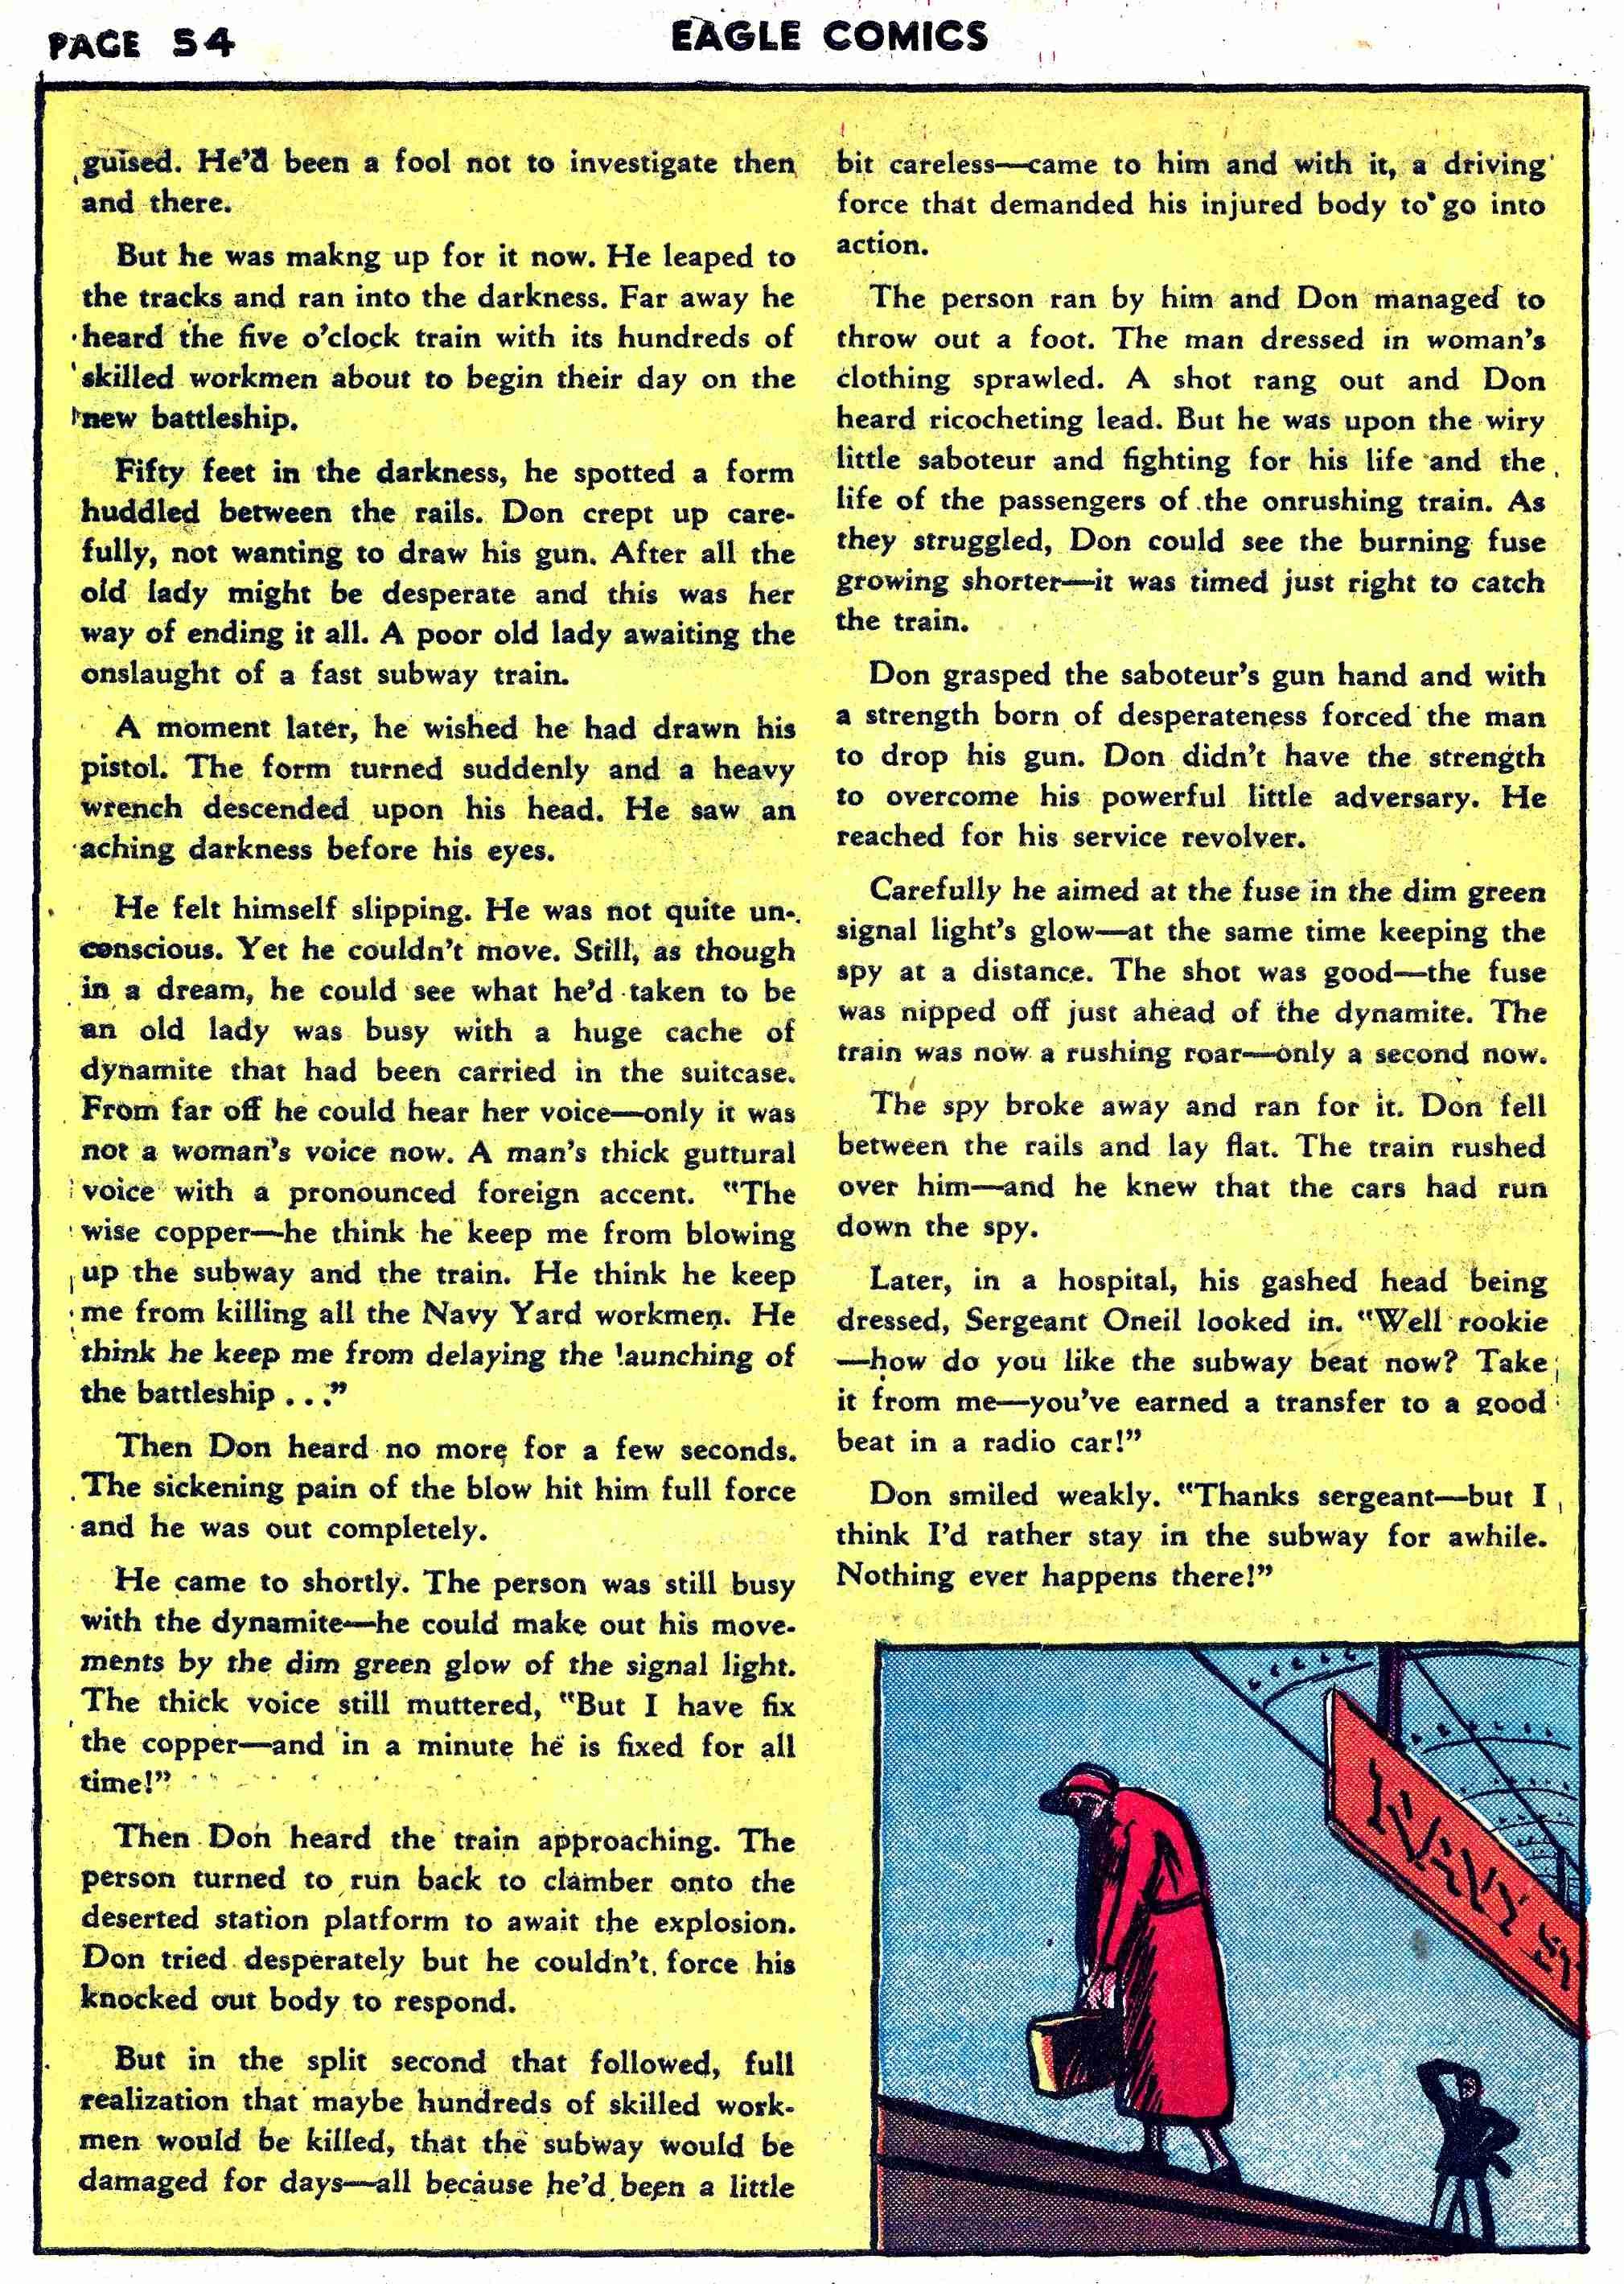 Read online The Eagle comic -  Issue #3 - 56